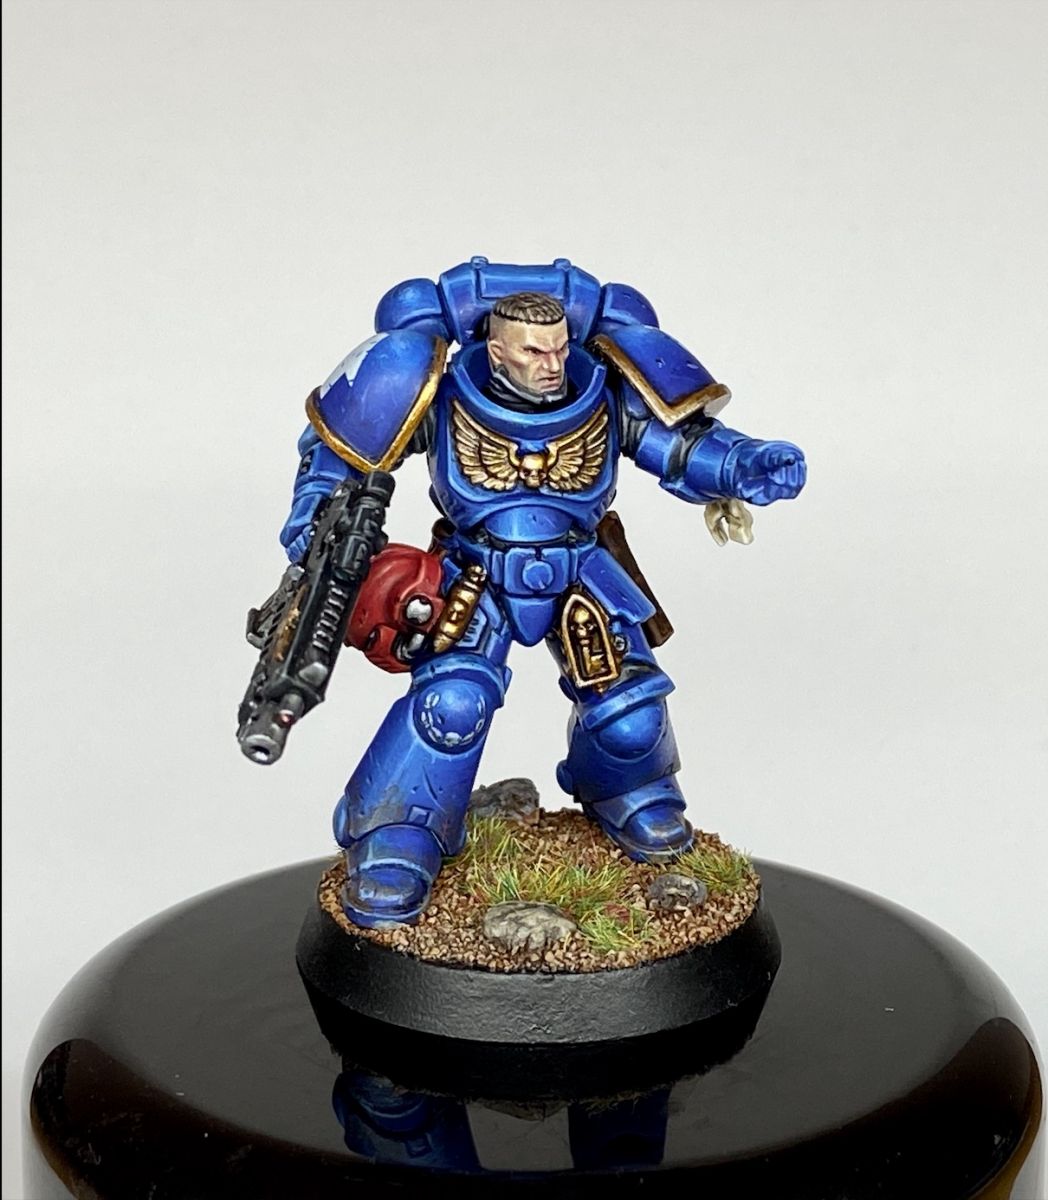 Ultramarines Primaris - The Bolter and Chainsword